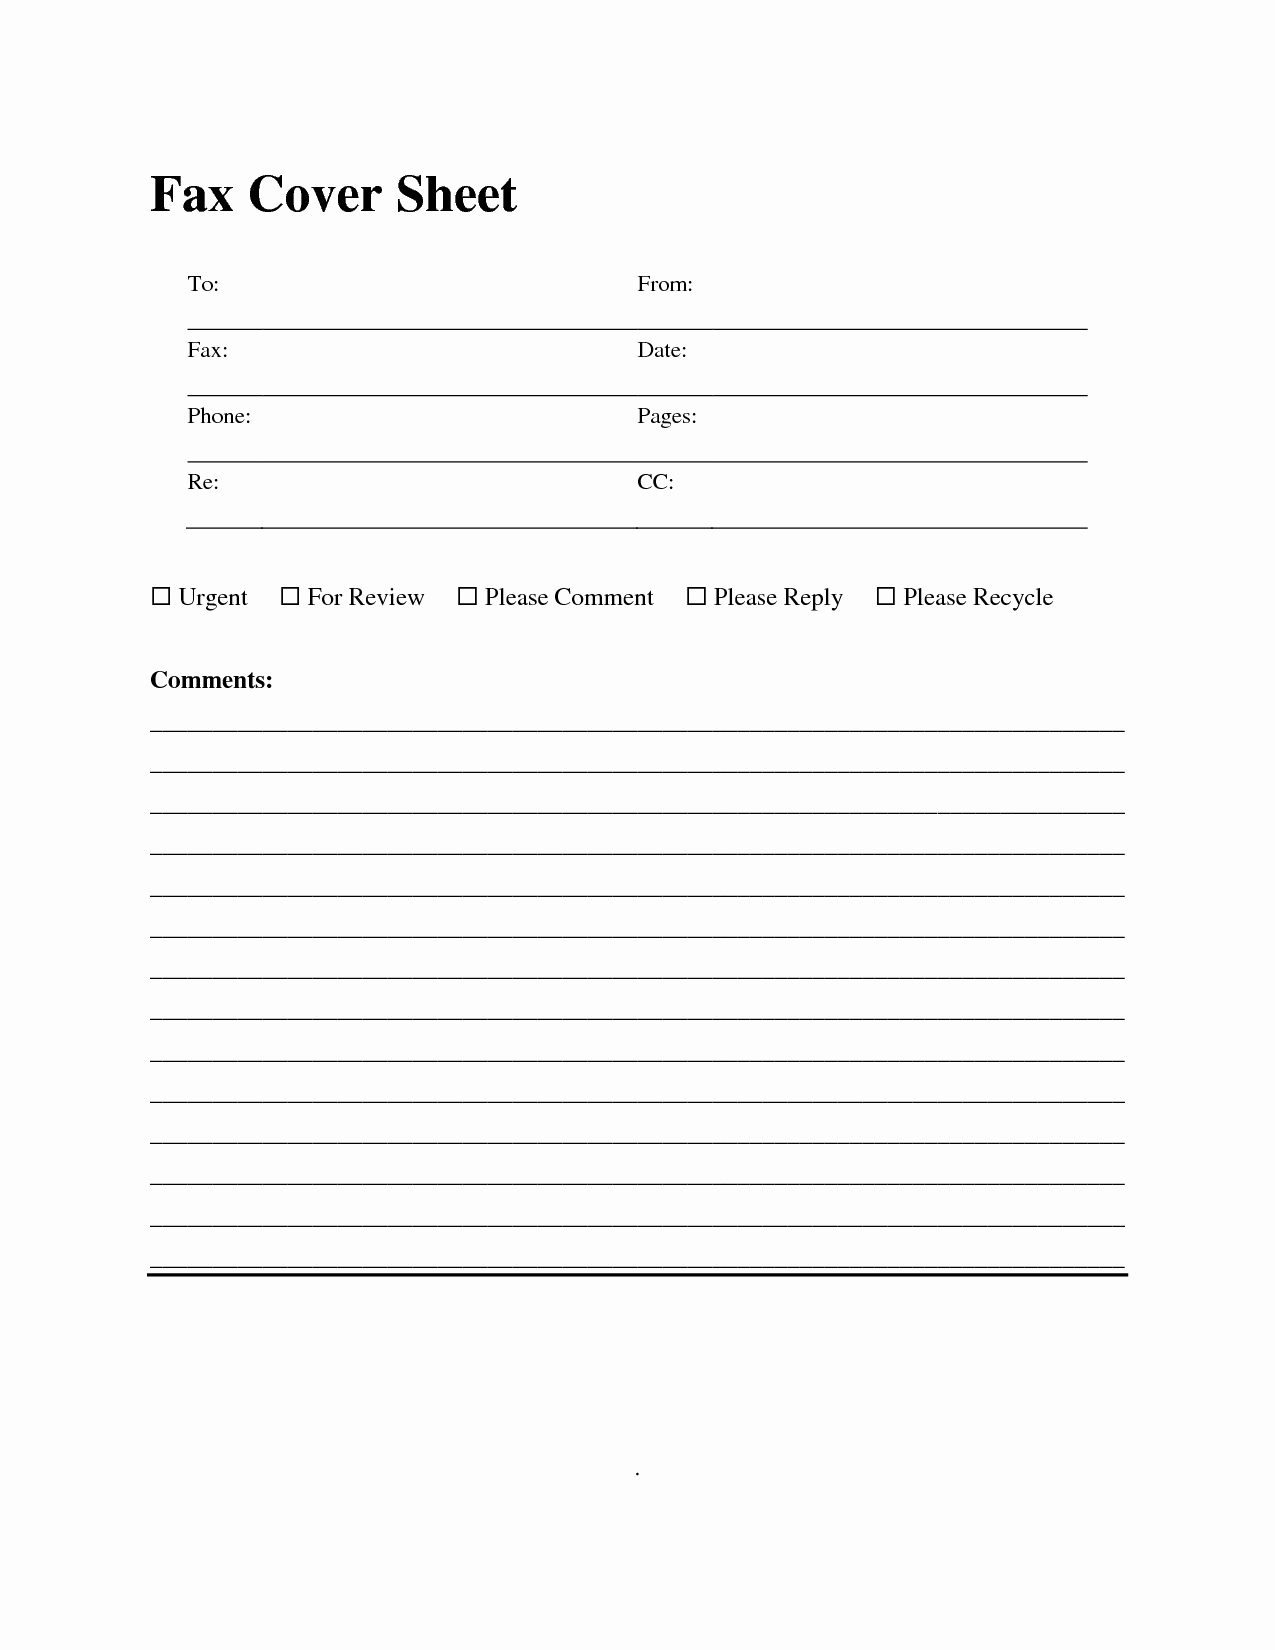 Cover Letter for Fax Document Inspirational 10 Best Of Fax Cover Page Template Fax Cover